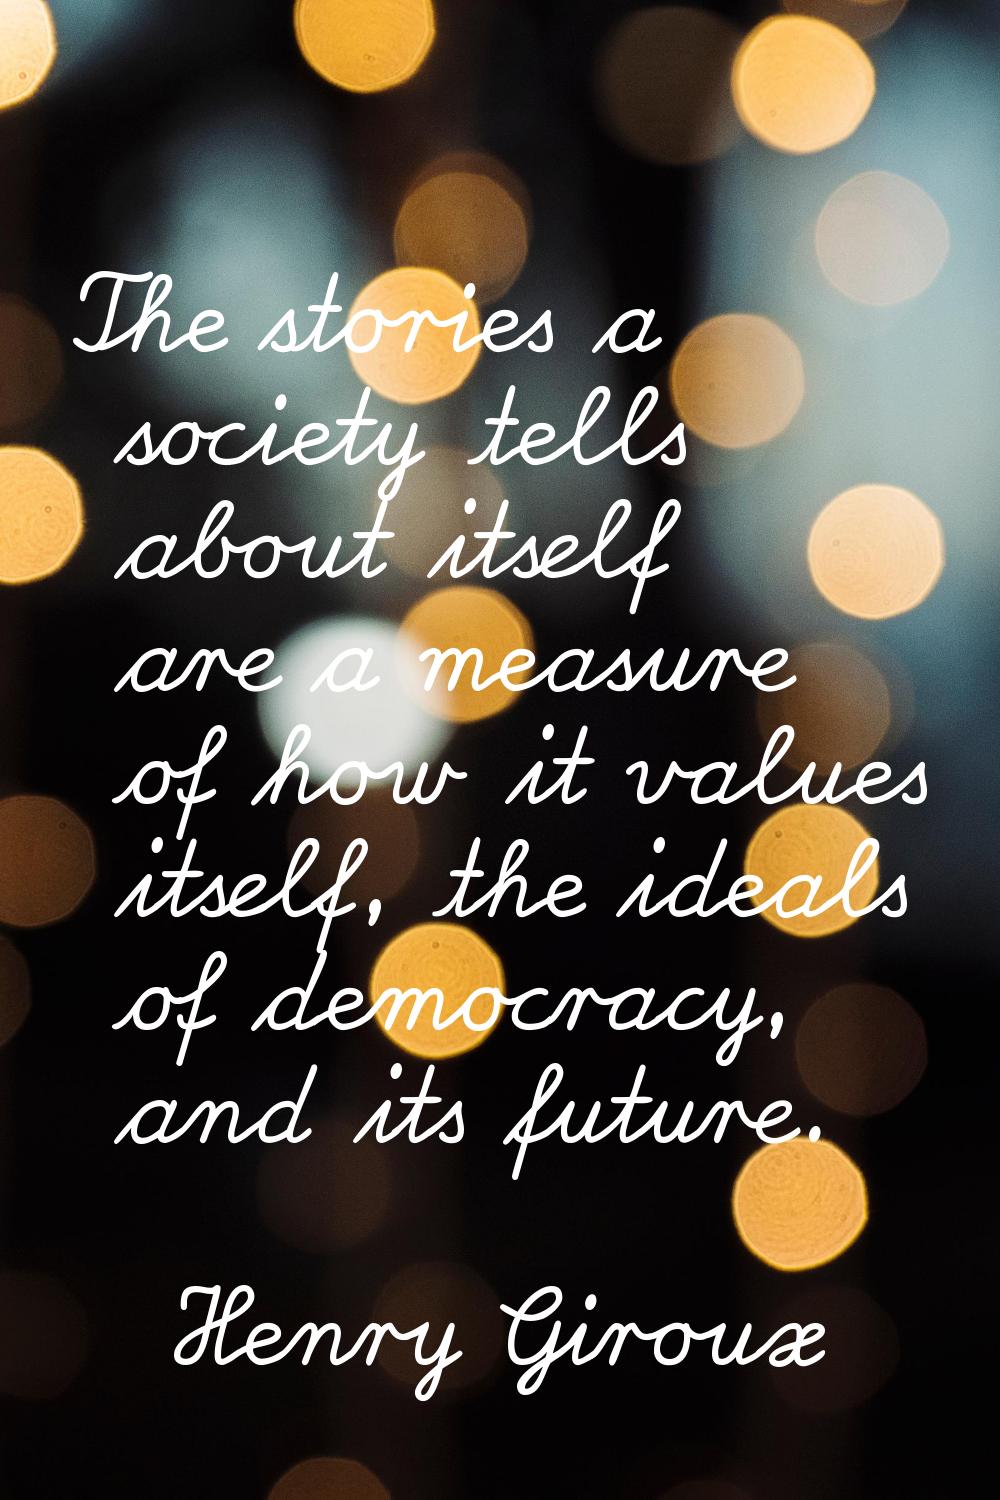 The stories a society tells about itself are a measure of how it values itself, the ideals of democ